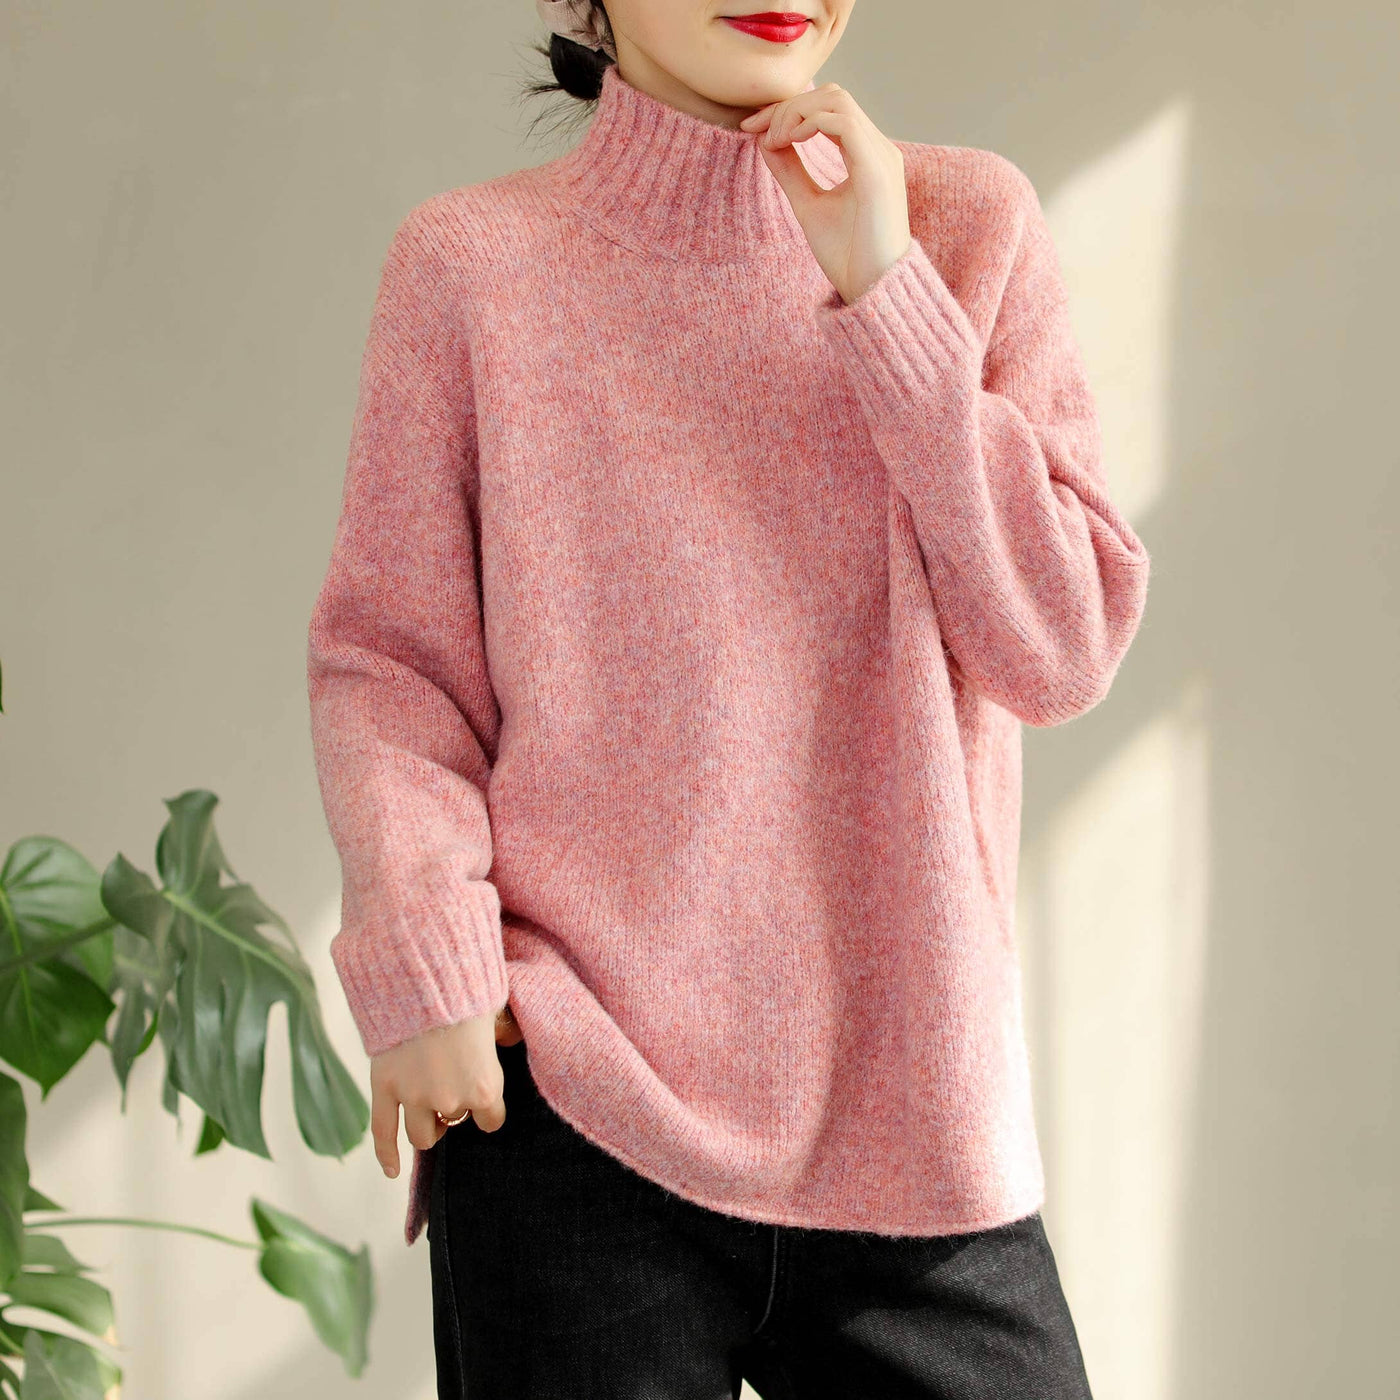 Women Autumn Winter Cotton Knitted Elastic Sweater Nov 2022 New Arrival One Size Pink 